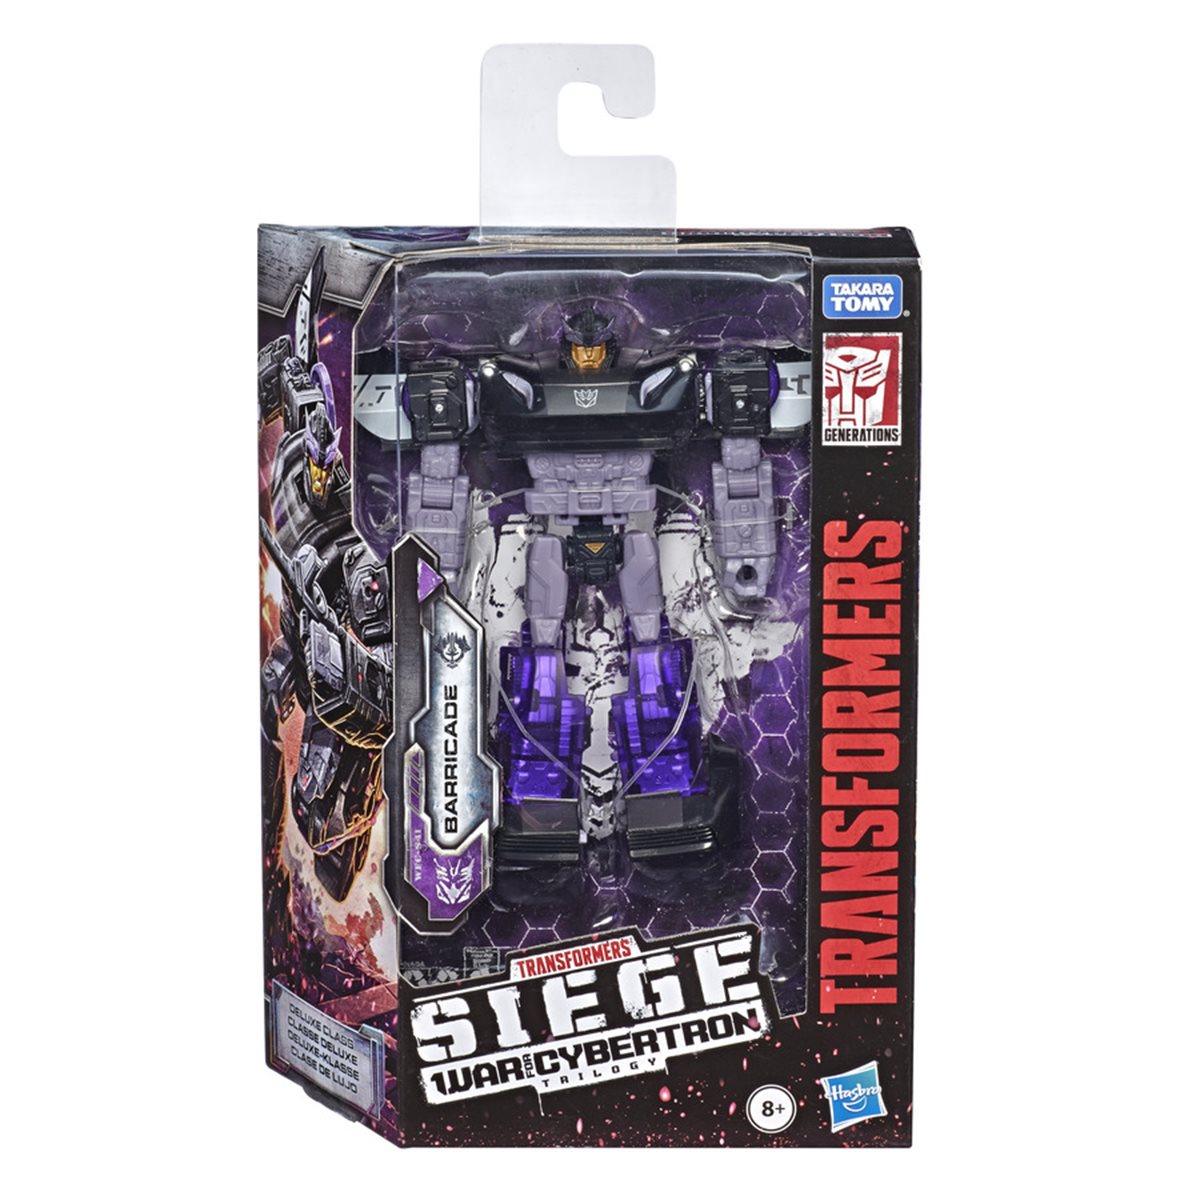 Transformers War For Cybertron Siege Deluxe BARRICADE IMPACTOR MIRAGE WAVE 4 NEW